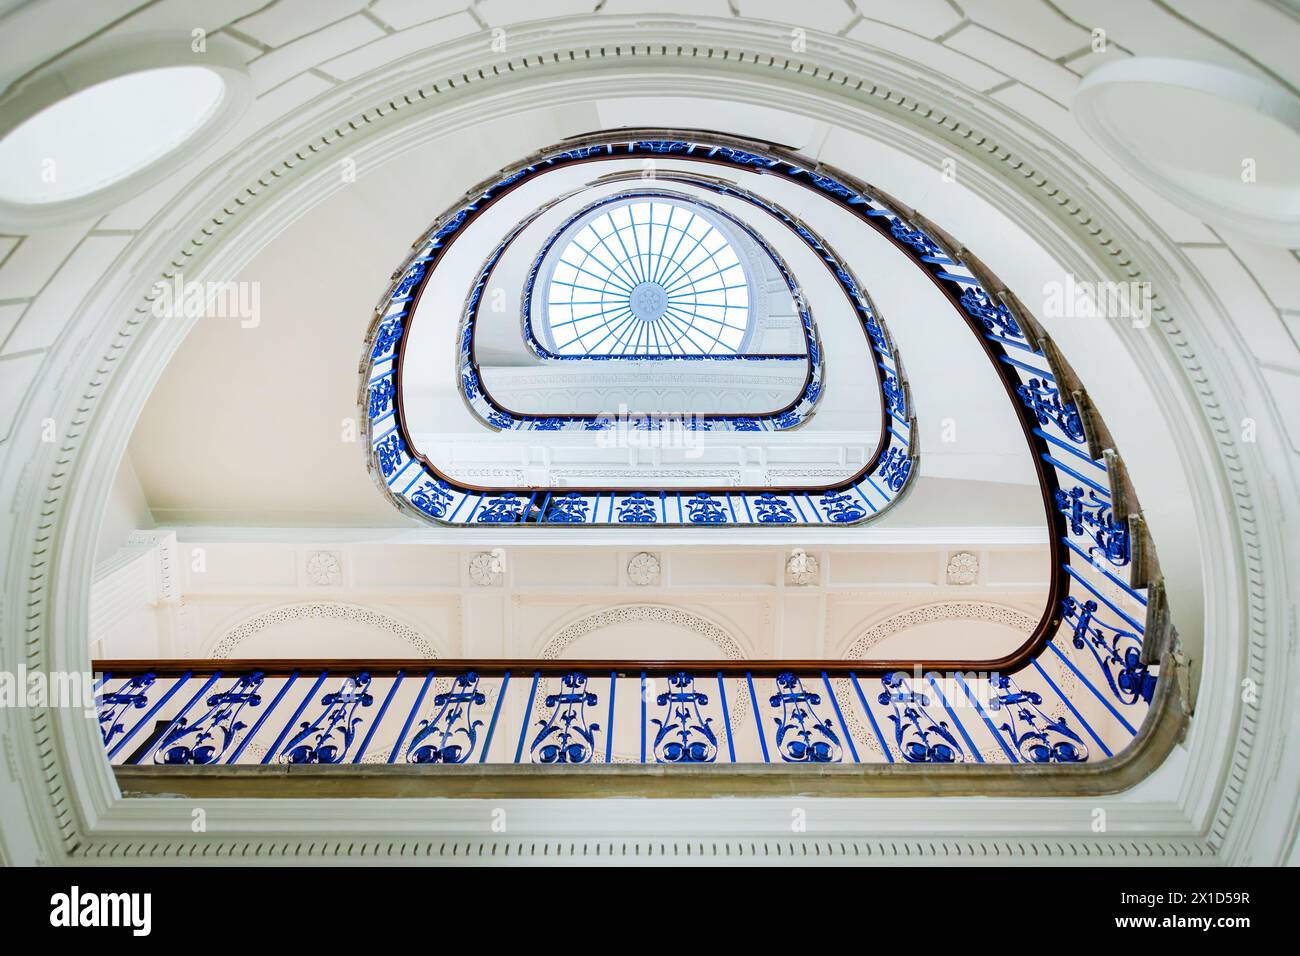 Spiral staircase at the Courtauld gallery, Somerset House, London, UK Stock Photo